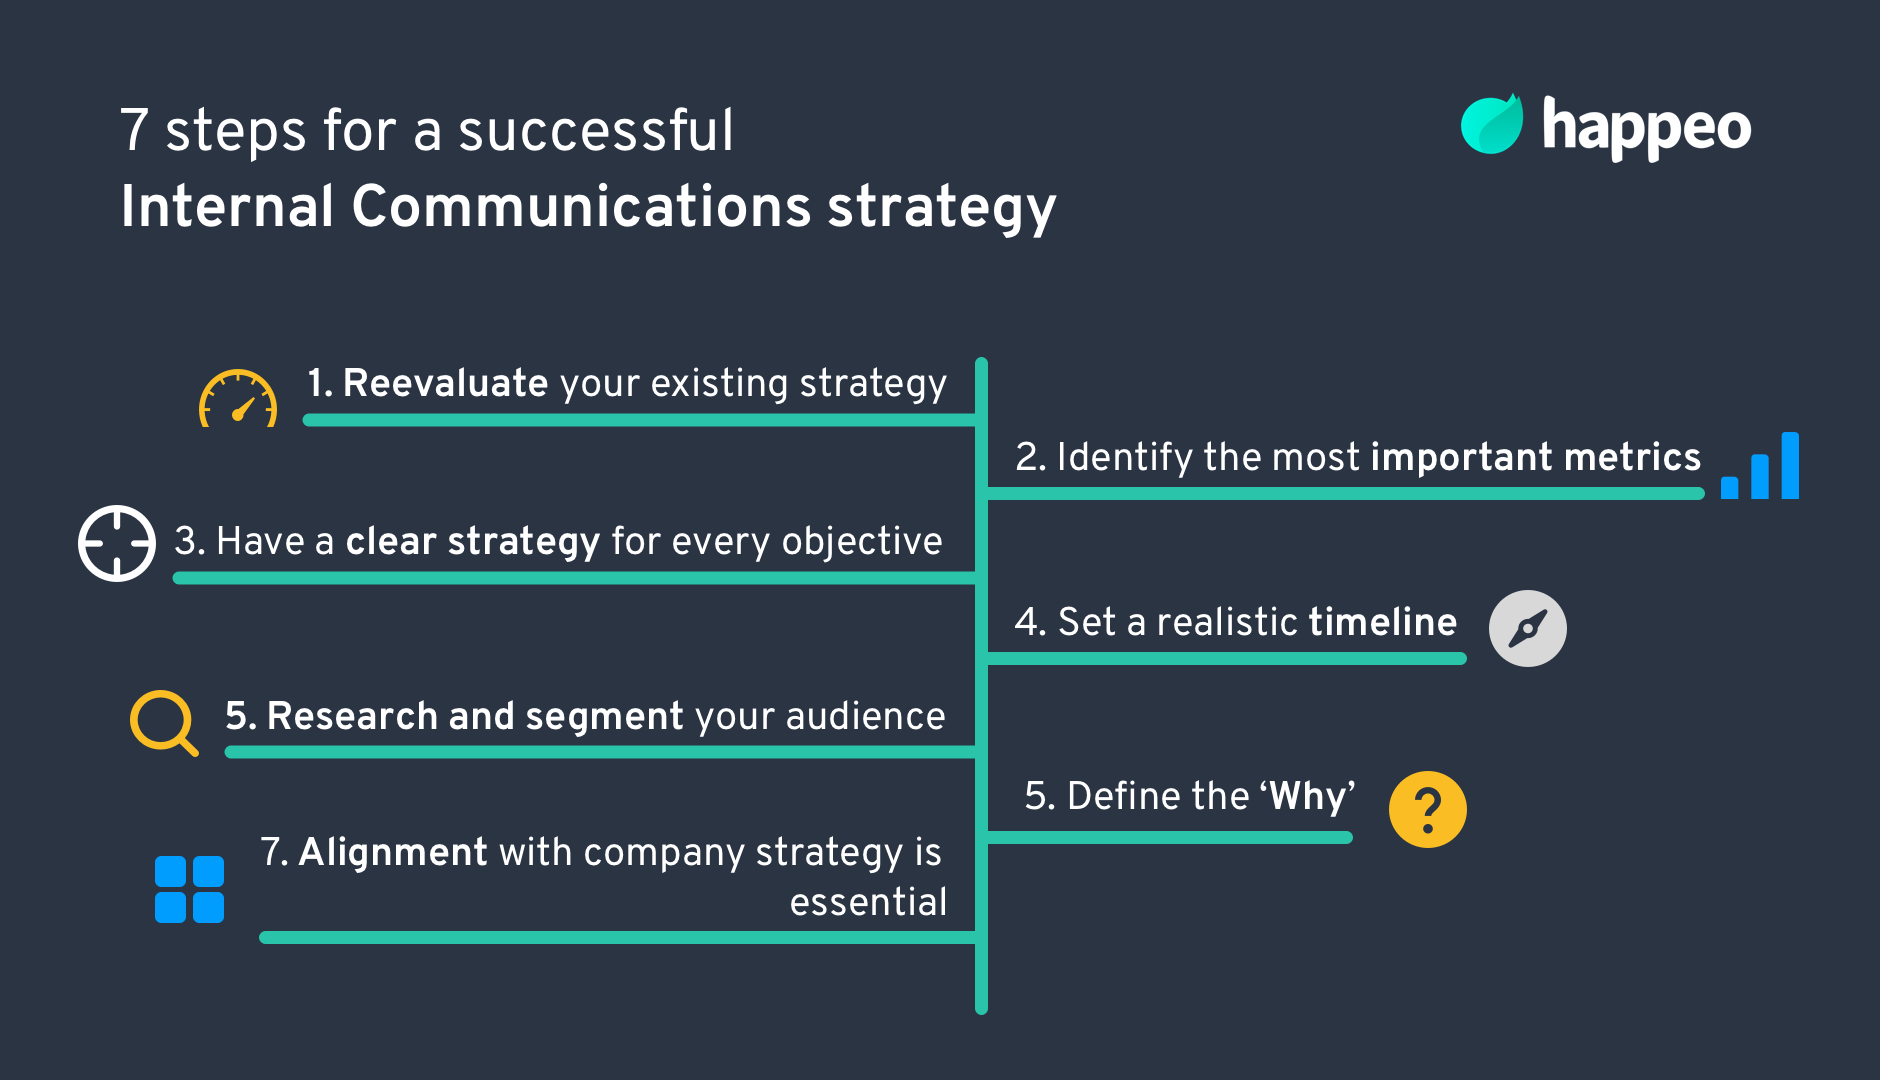 guide-to-internal-communications-2021-happeo